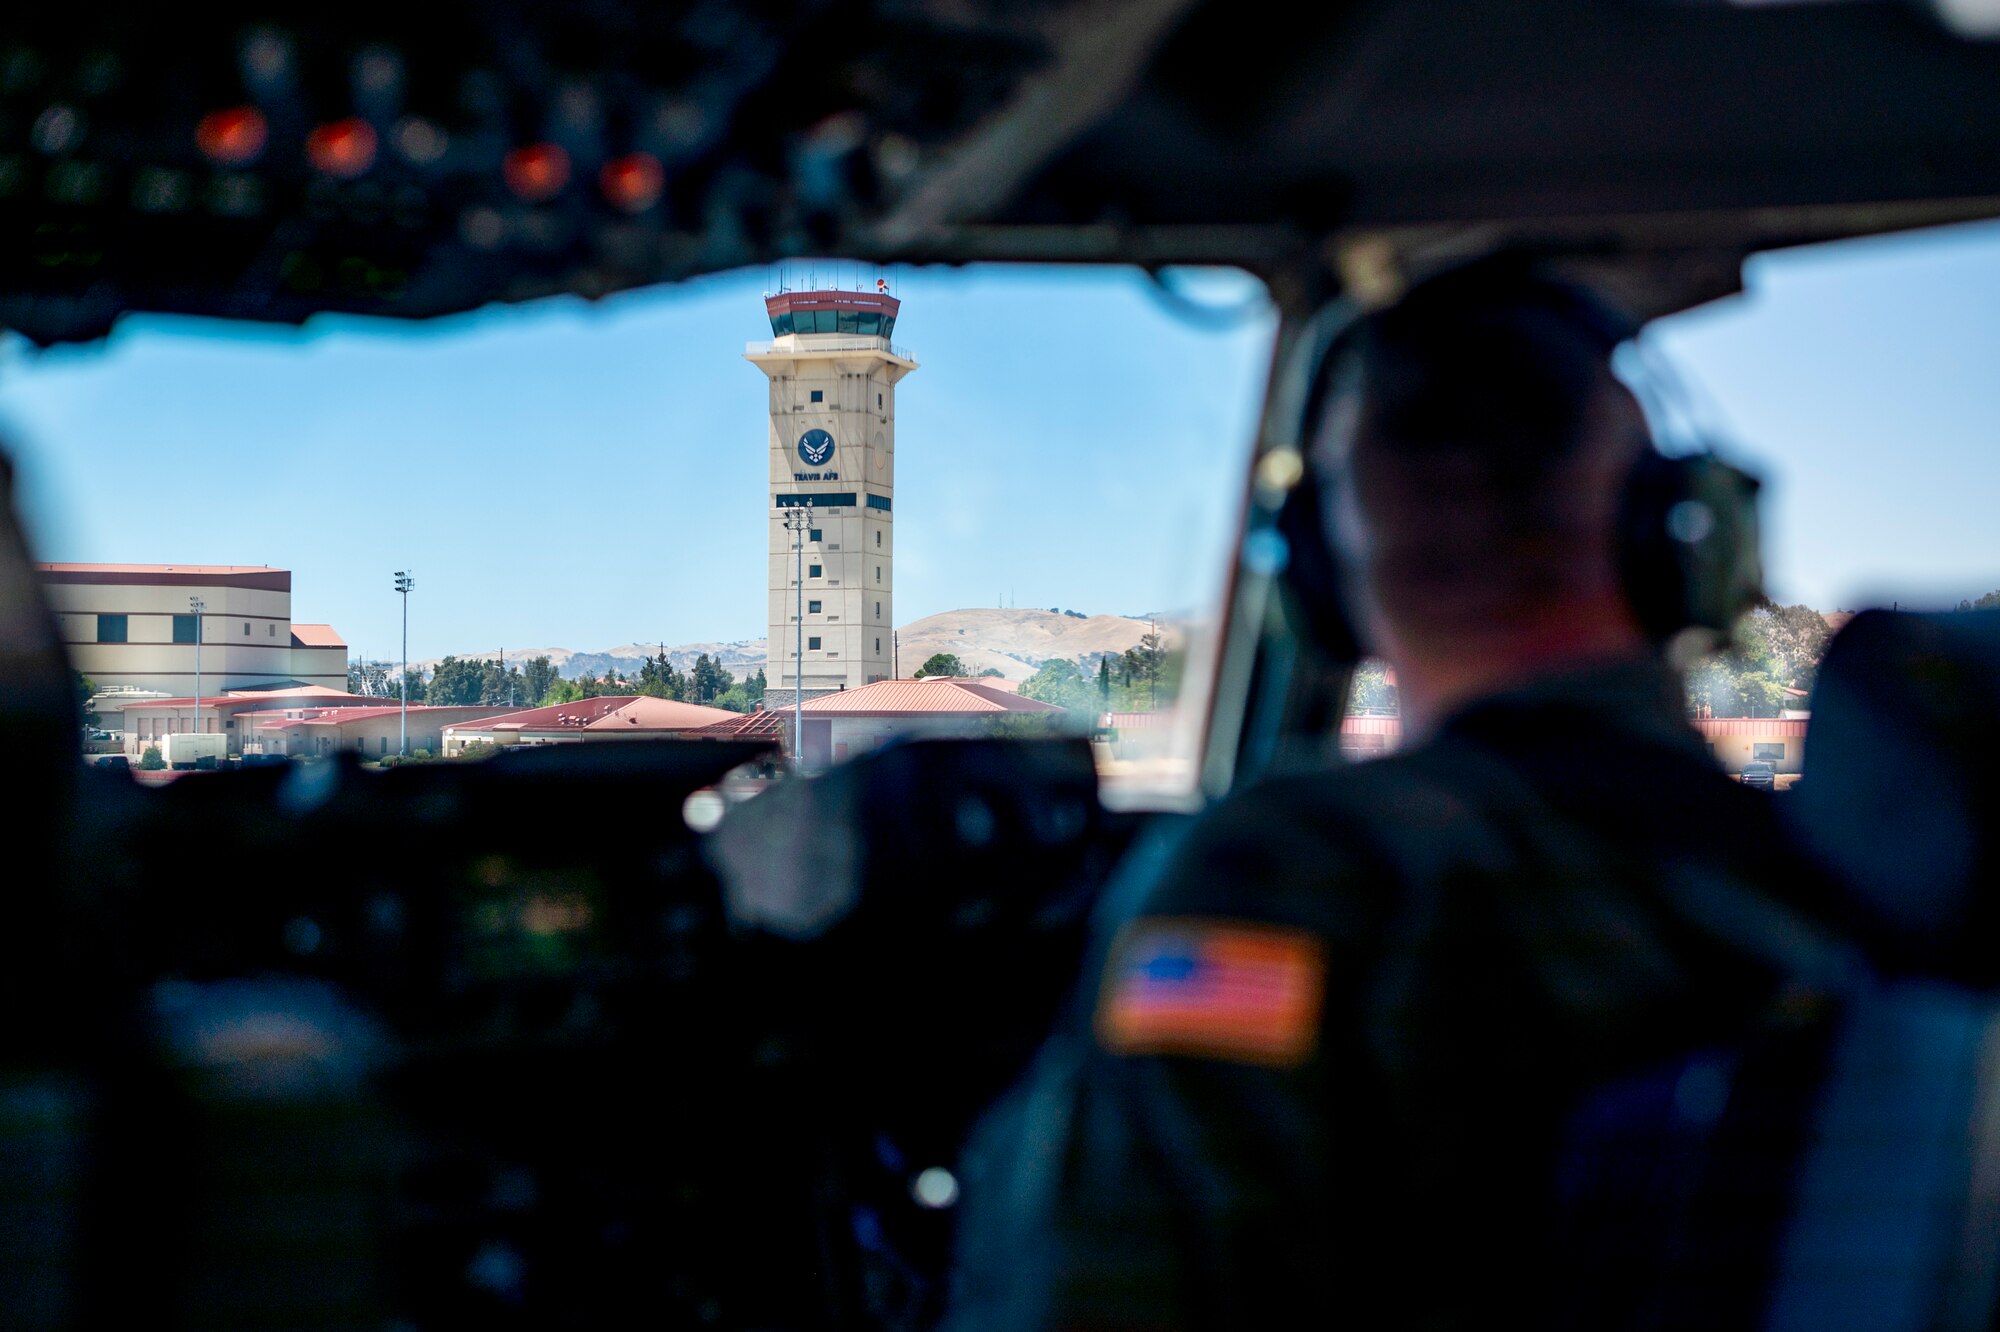 A photo of the control tower from the flight deck of an airplane